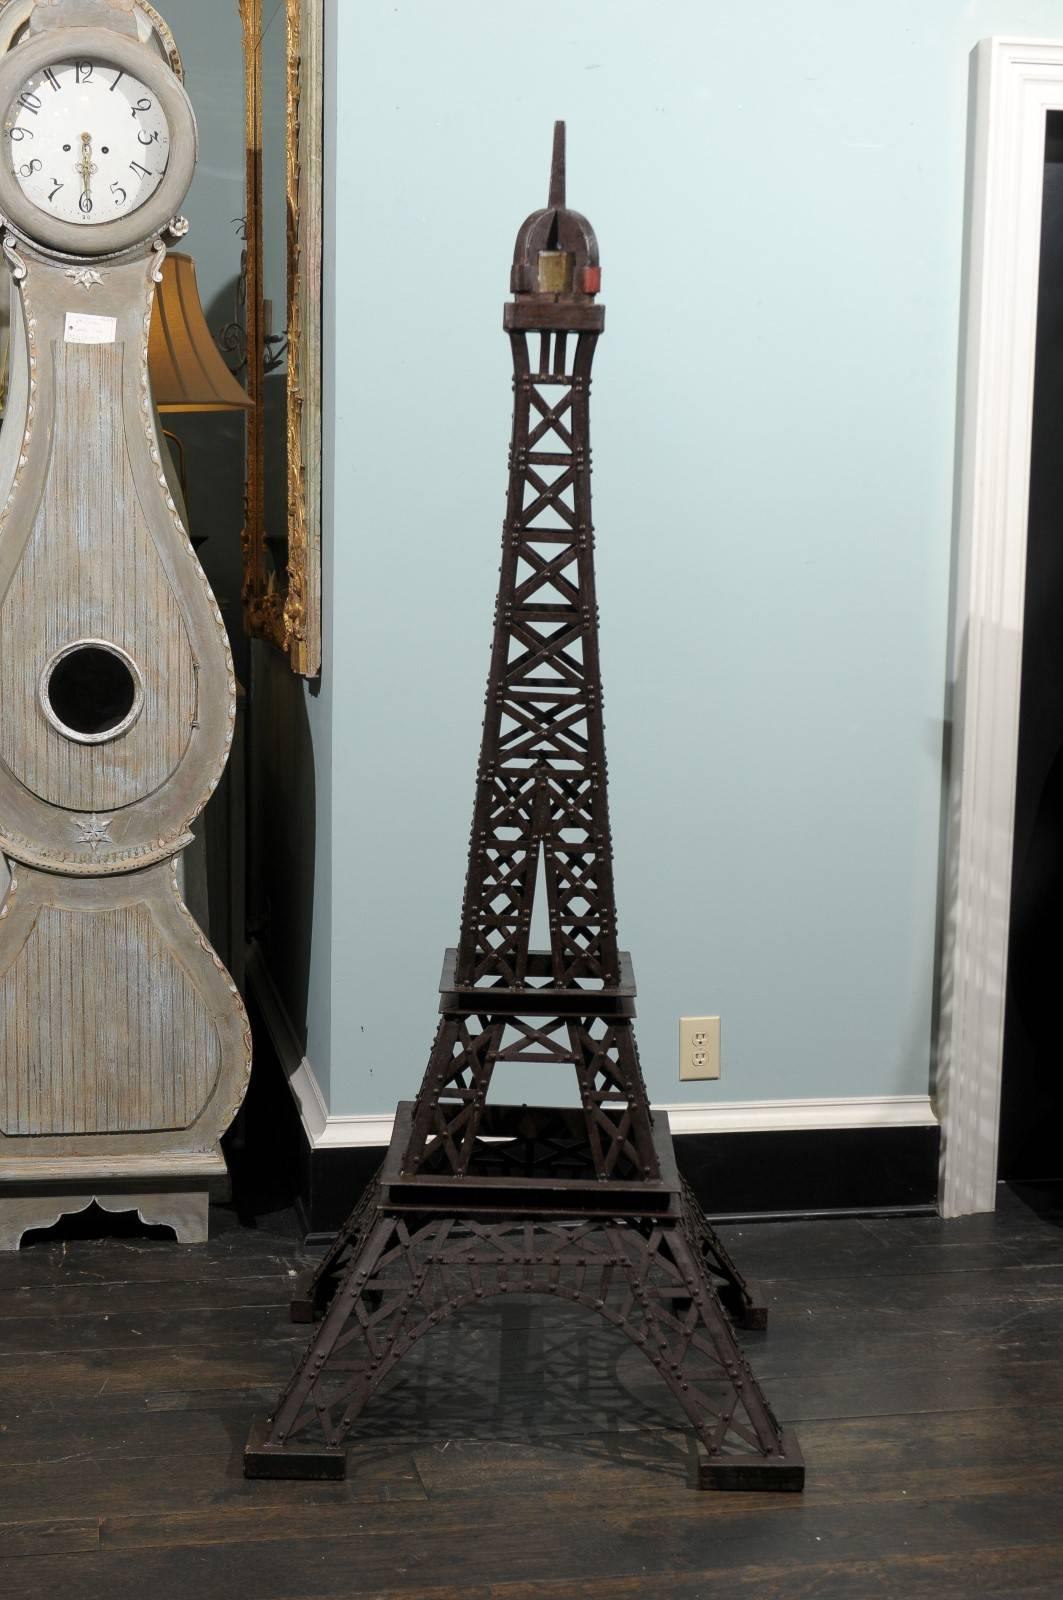 A tall 6.5 foot tall Eiffel Tower replica statue.  This iron replica of Paris' famous Eiffel Tower is custom made of various vintage pieces. It is heavily weighted, with a nice age. The proportions are nicely respected, the color is of a dark brown